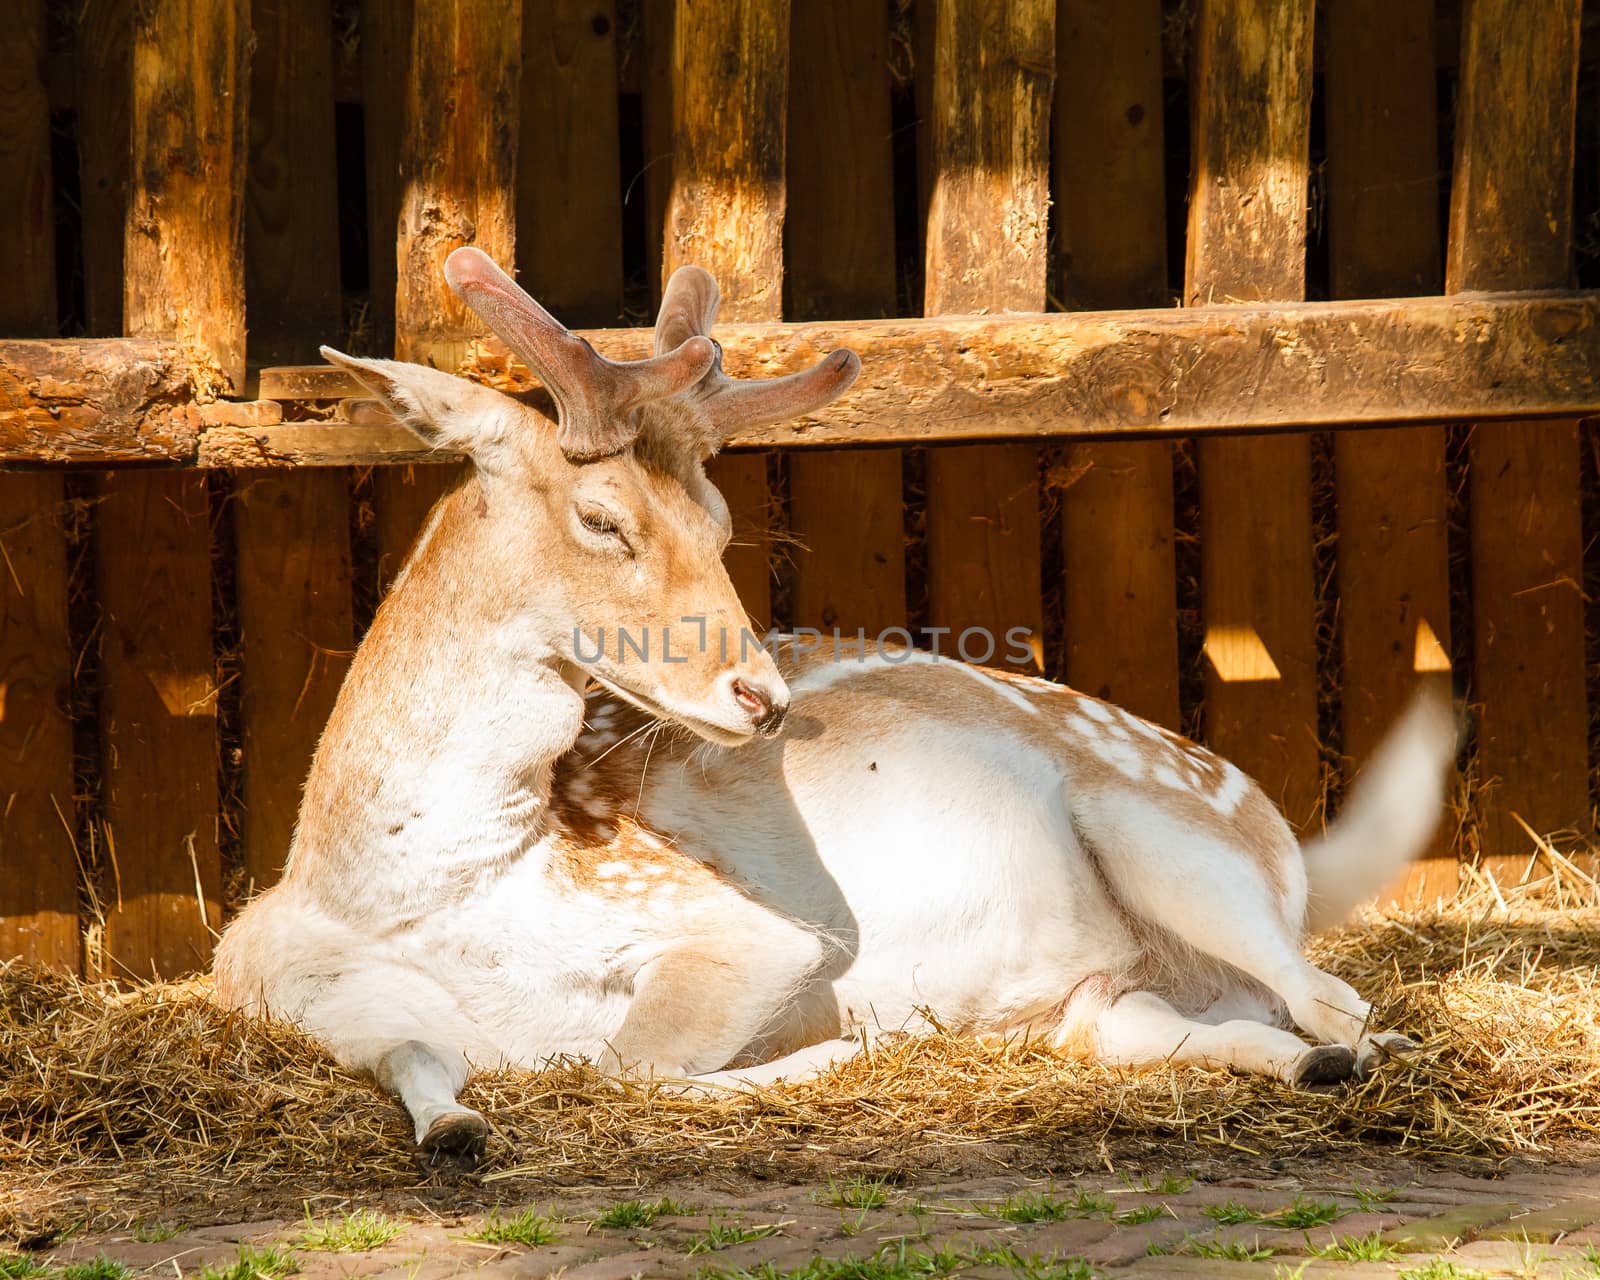 Young male deer lying on a pile of straw in a barn.